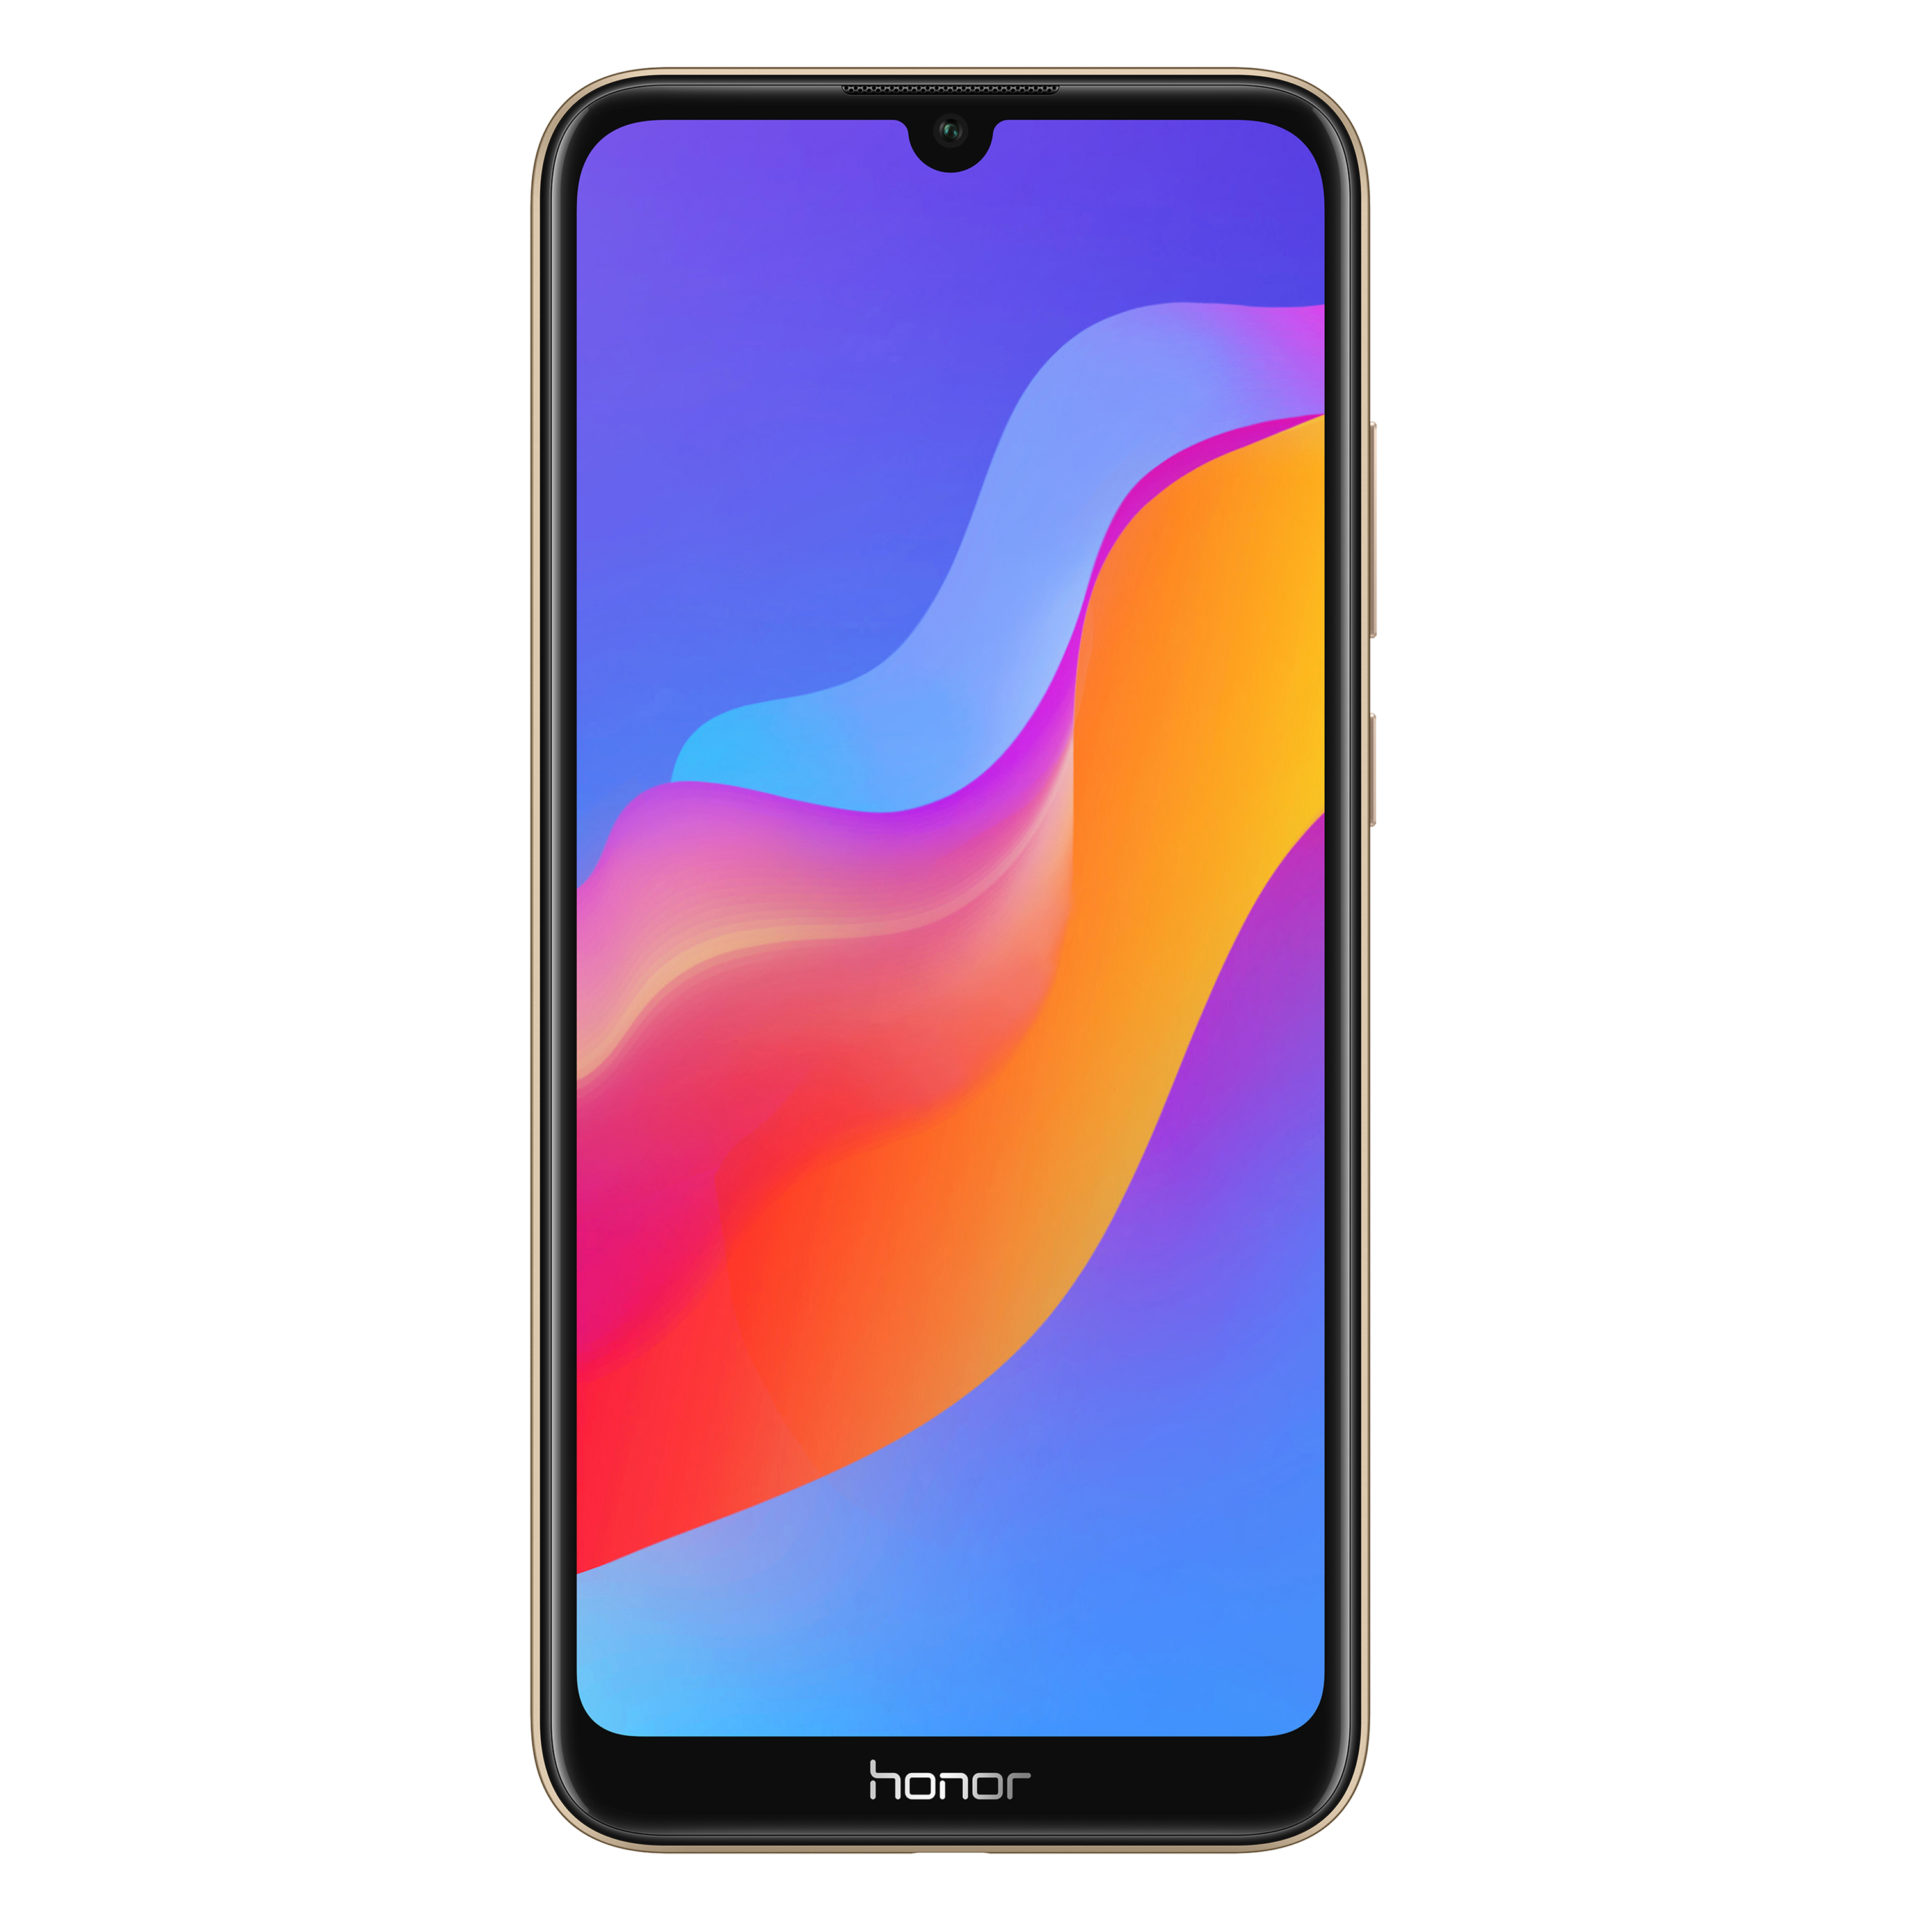 HONOR 8A